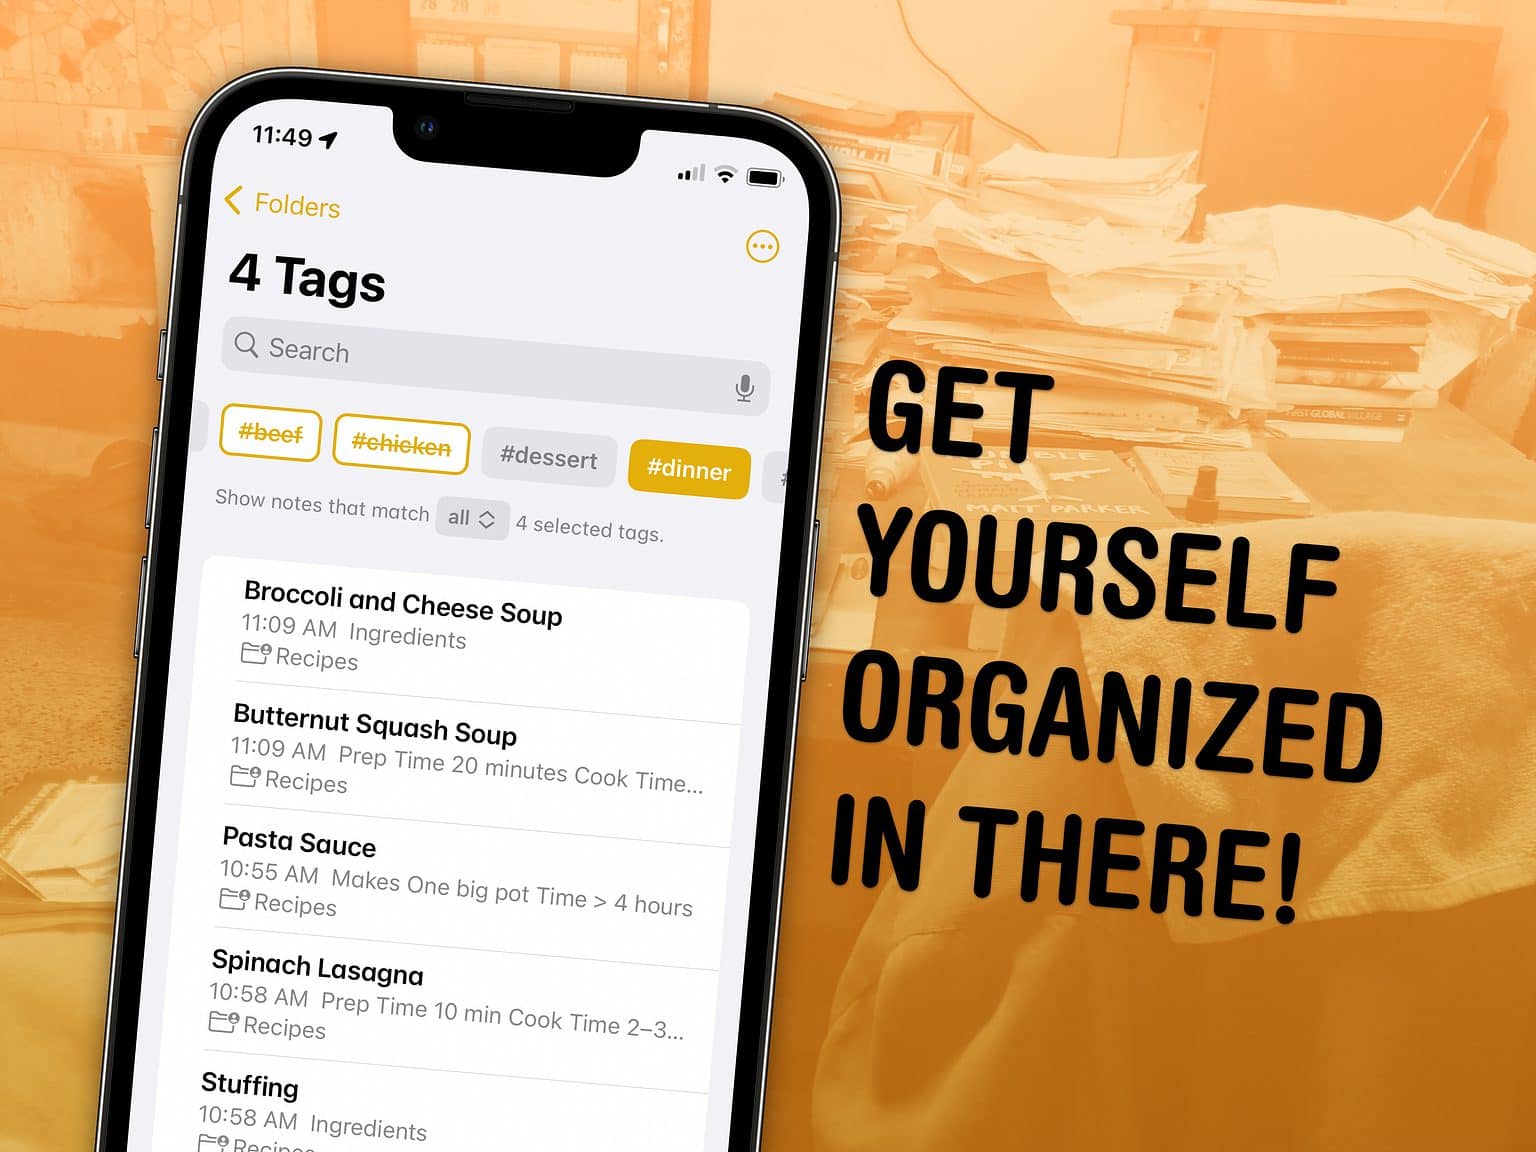 Get yourself organized in there!